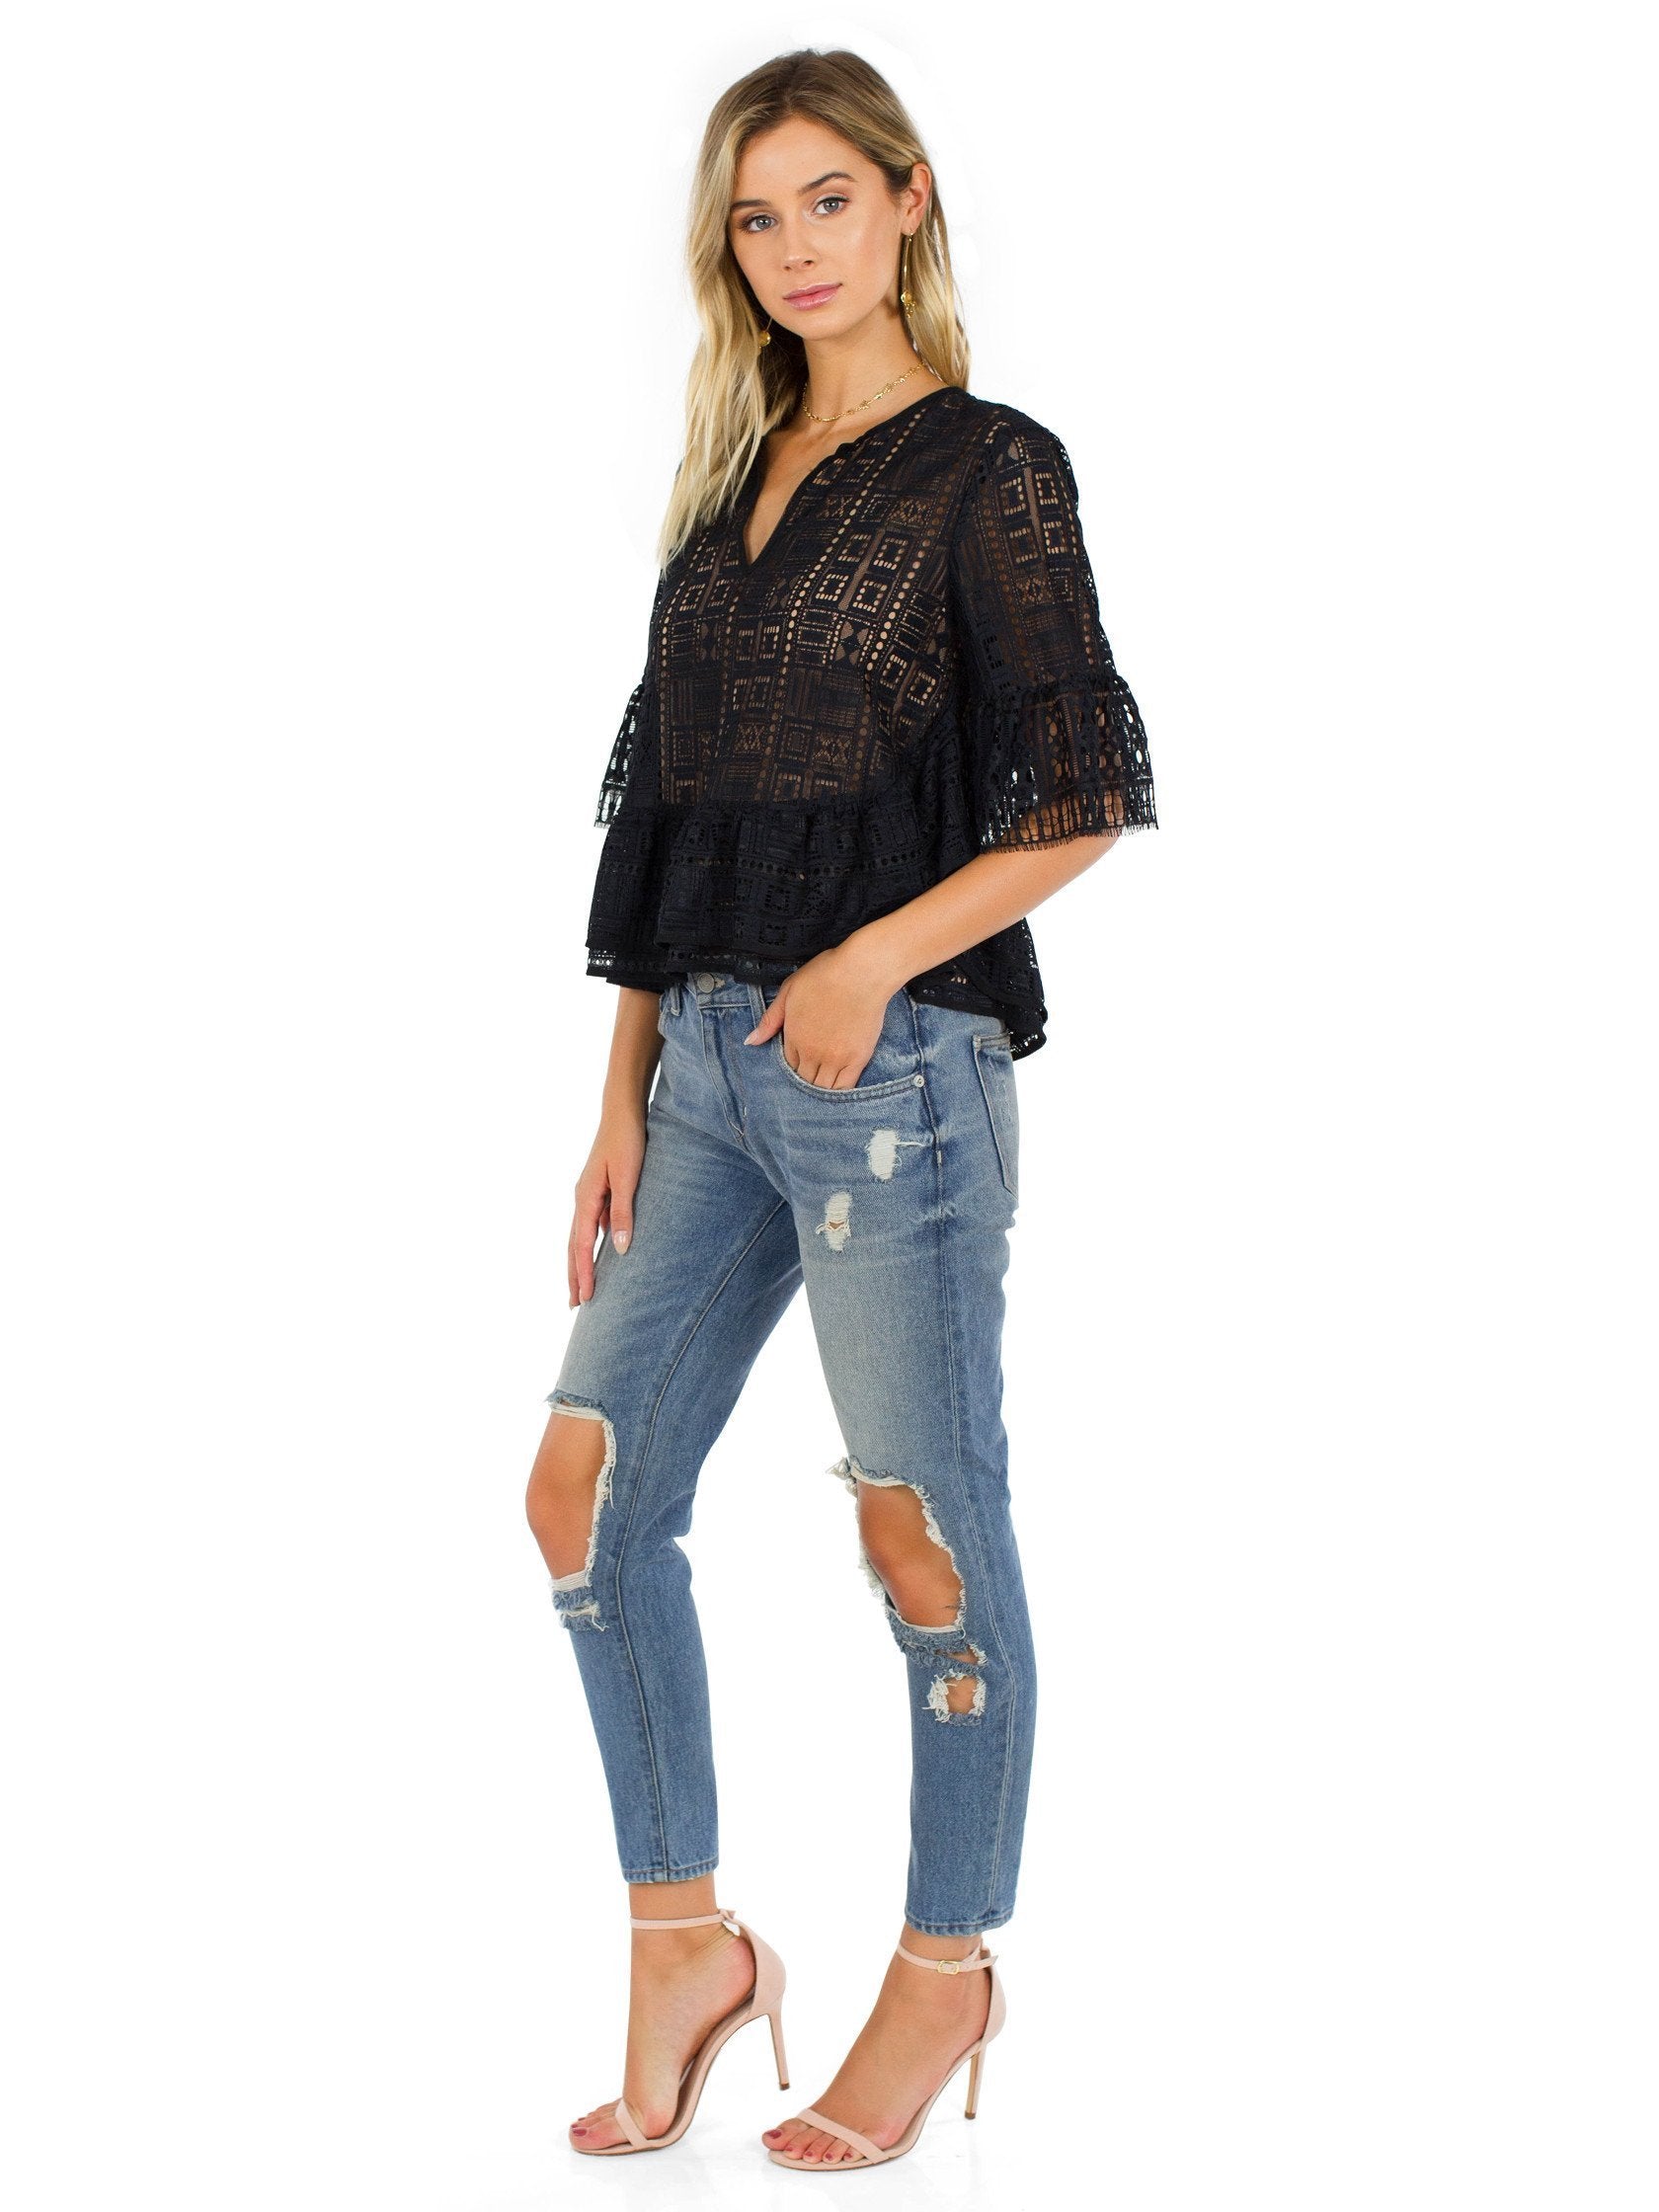 Women wearing a top rental from BCBGMAXAZRIA called Immane Ruffled Lace Top